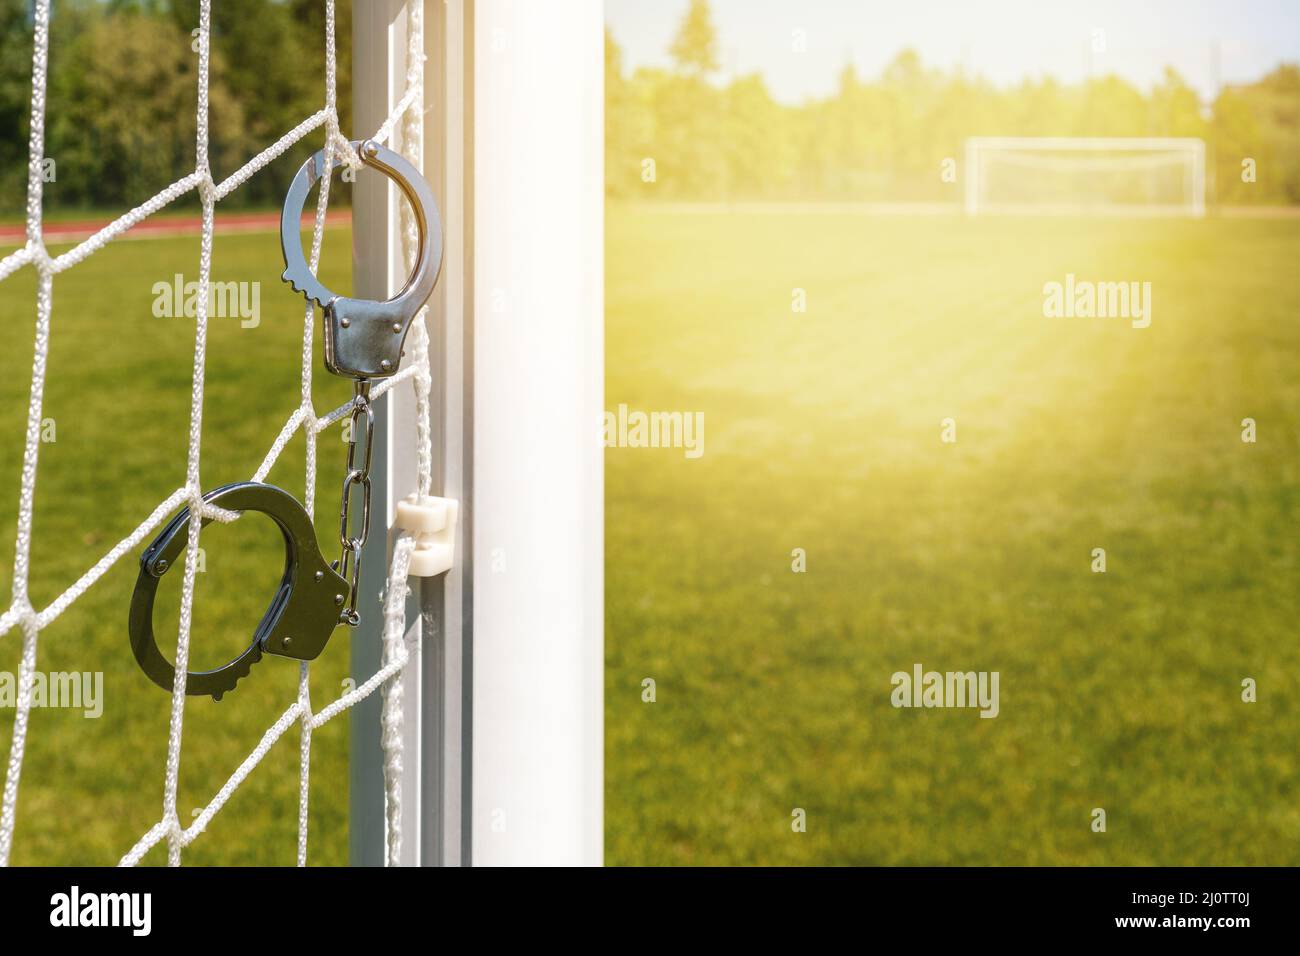 Handcuffs hanging on the football goals Stock Photo